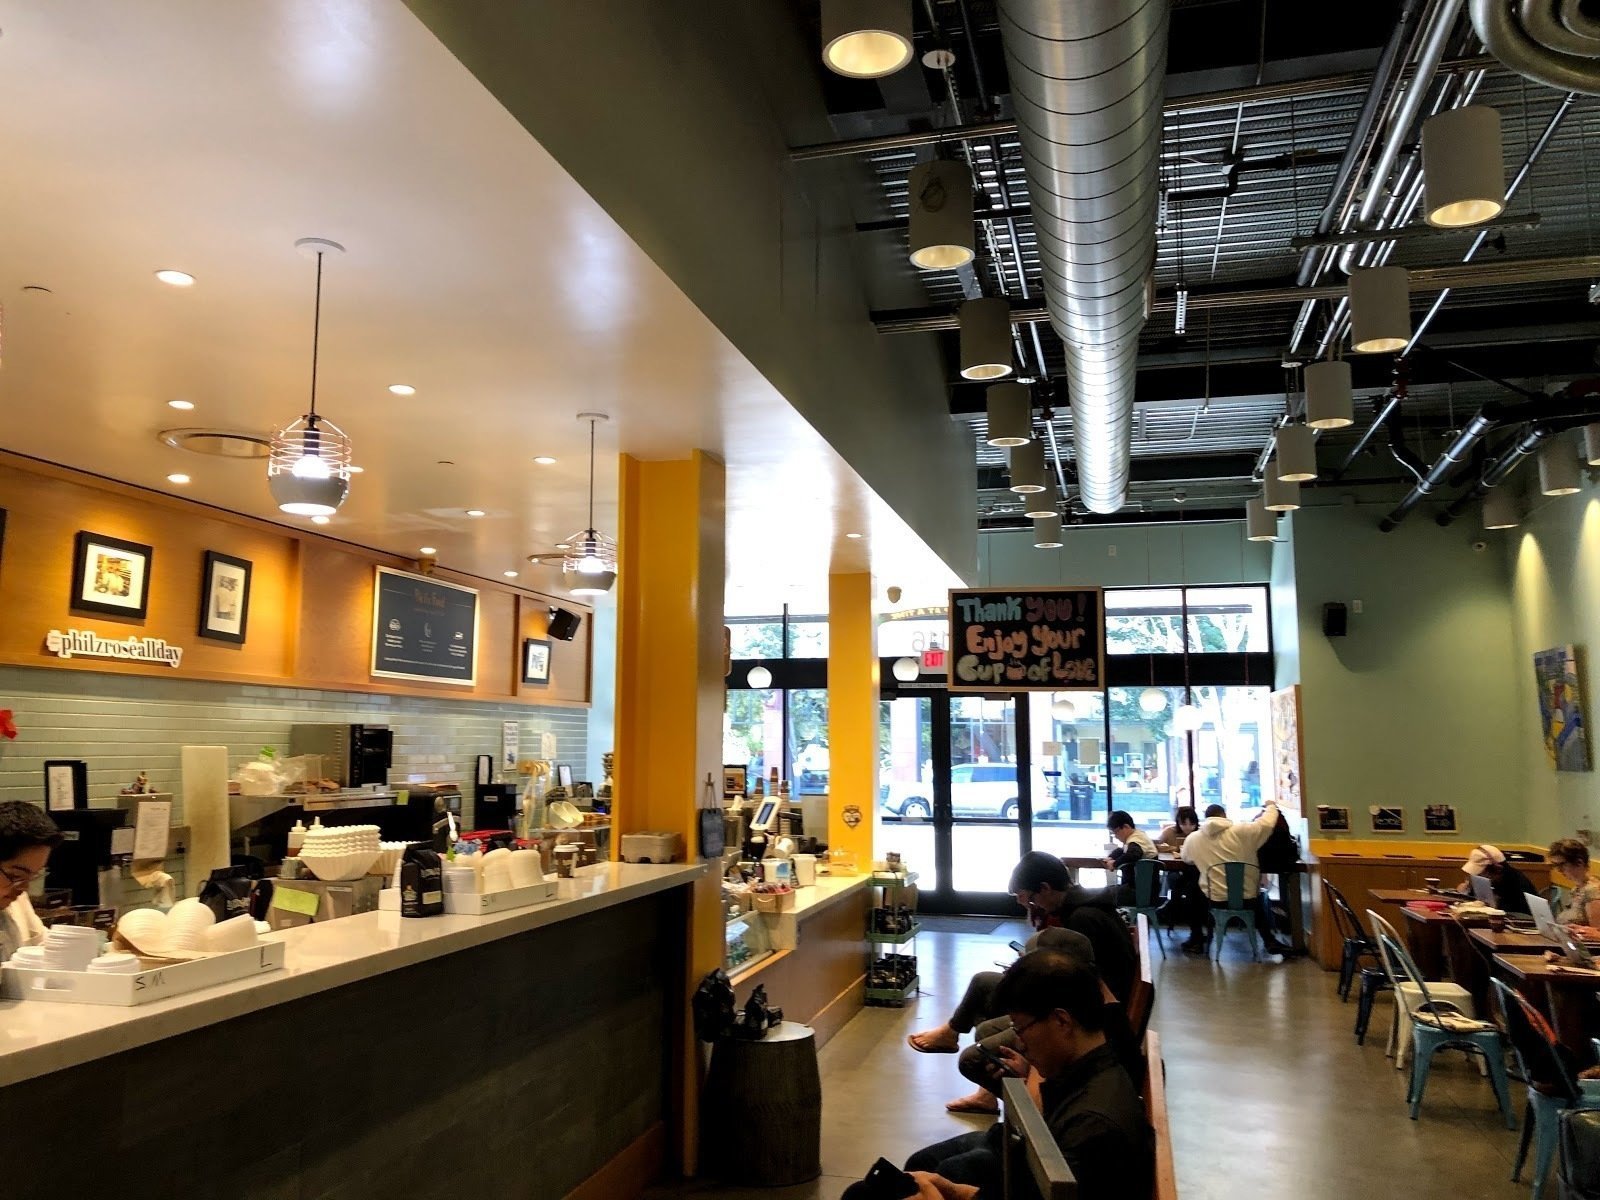 <span class="translation_missing" title="translation missing: en.meta.location_title, location_name: Philz Coffee, city: San Mateo">Location Title</span>